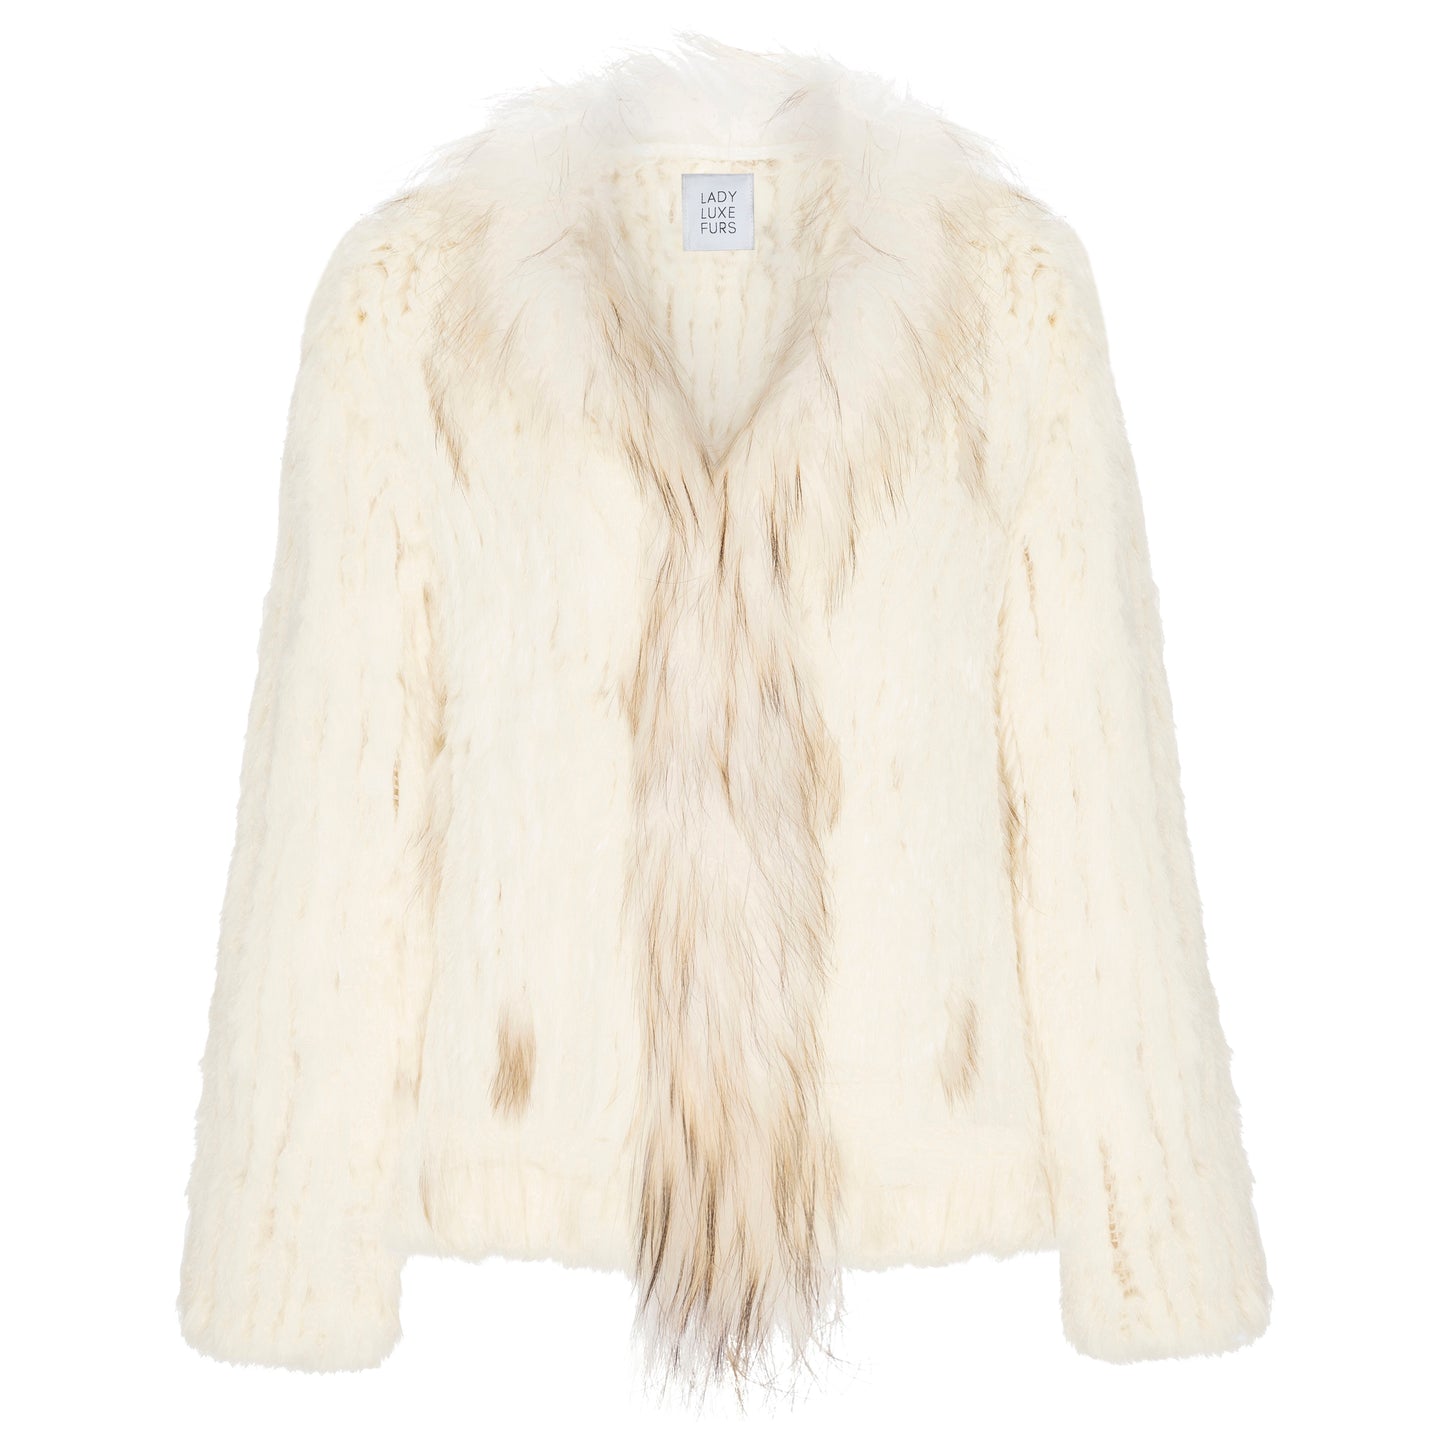 Lady Luxe Furs Jacket  Cream